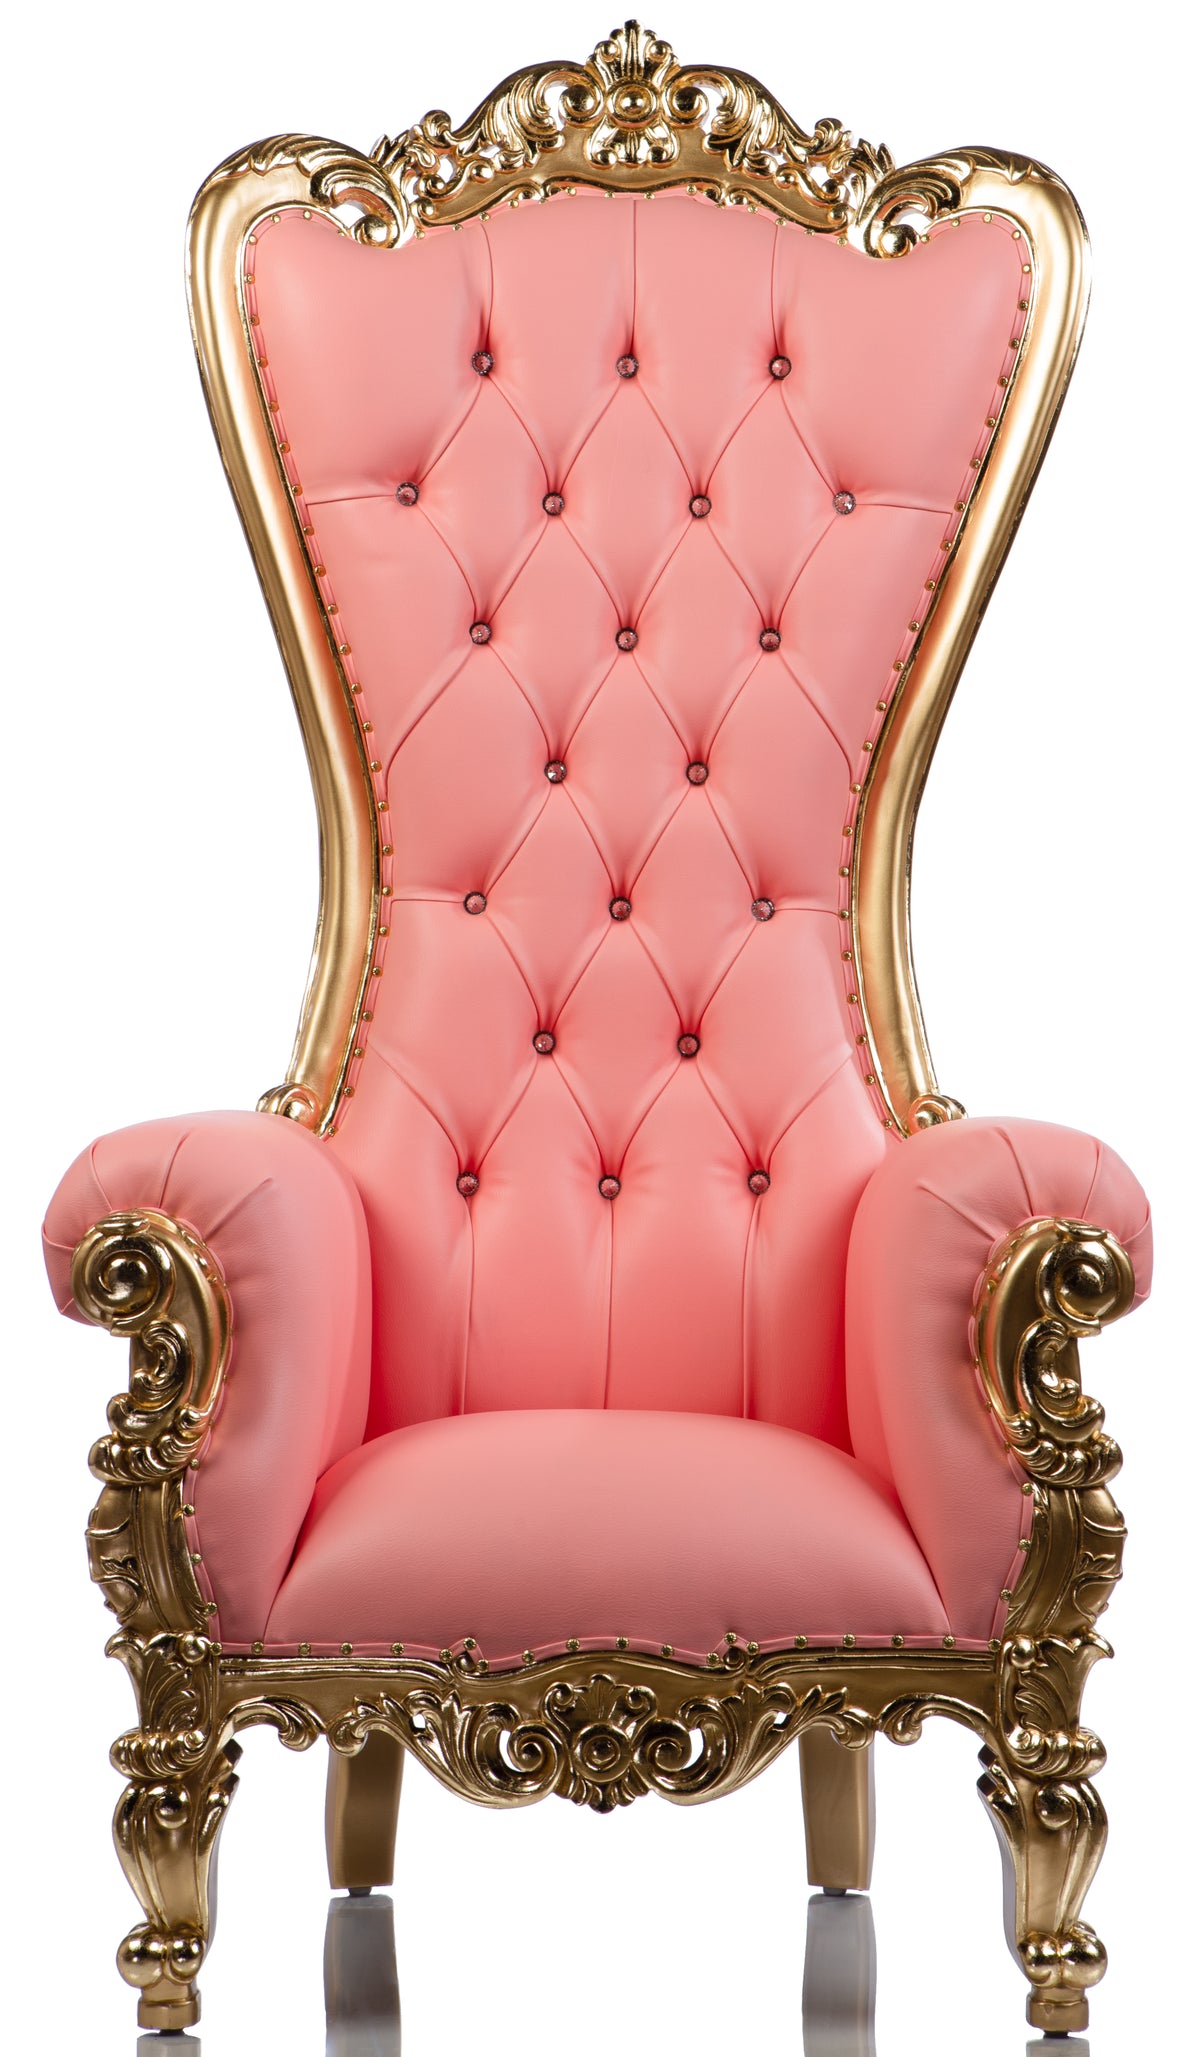 "Bubble Gum" Shellback Throne (Pink/Gold)